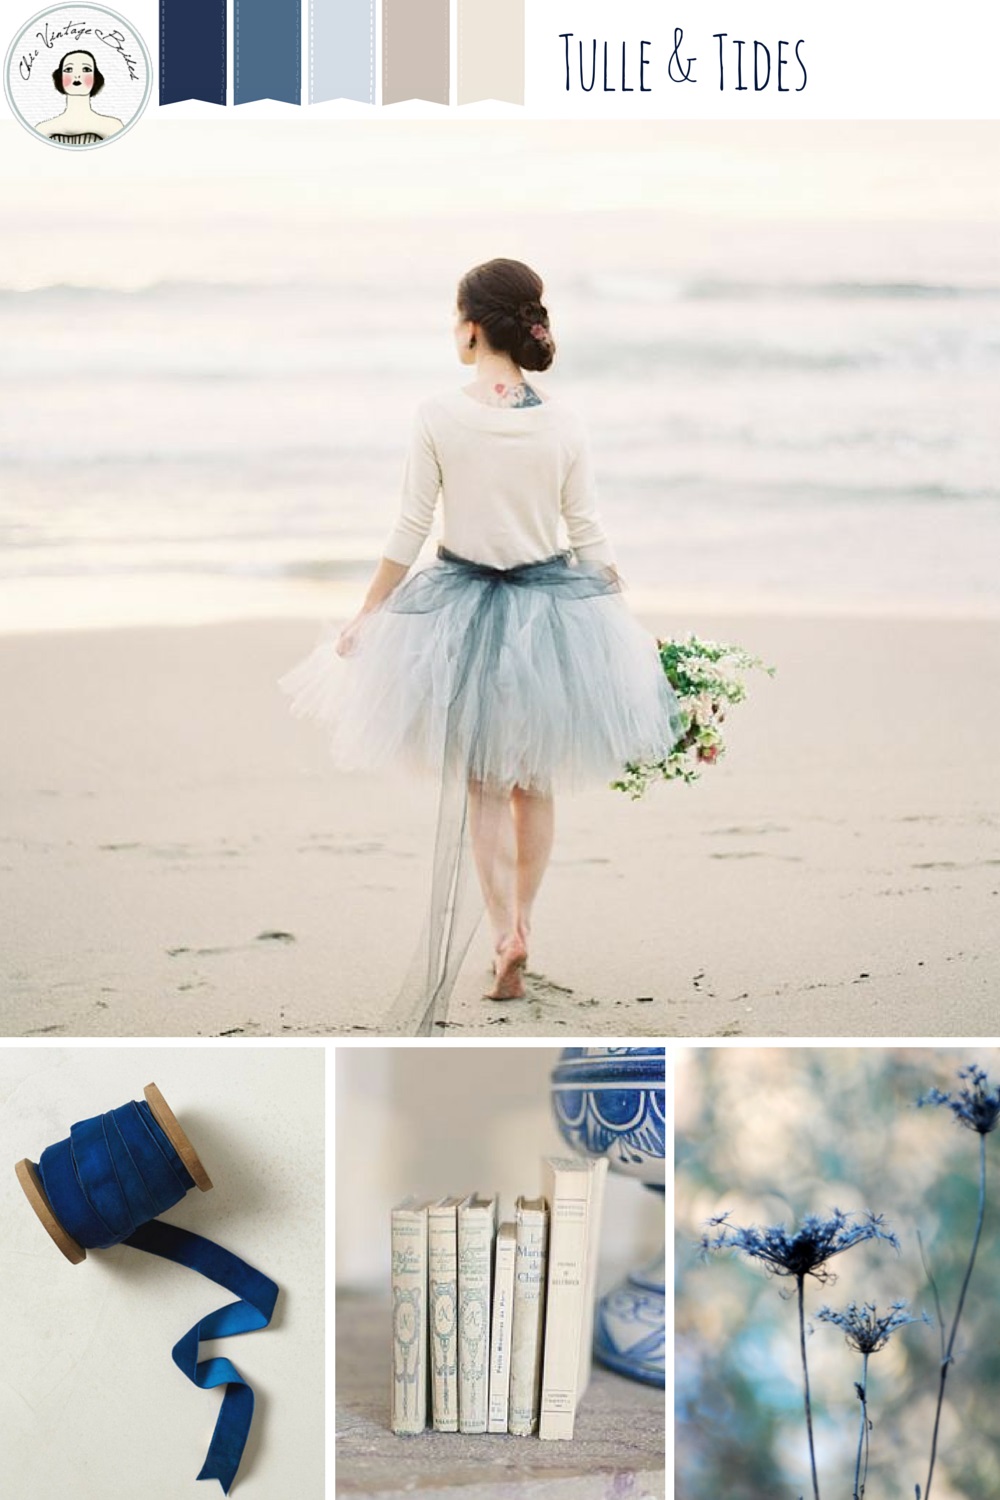 Tulle & Tides - Beach Wedding Inspiration in Vintage Blue and Linen